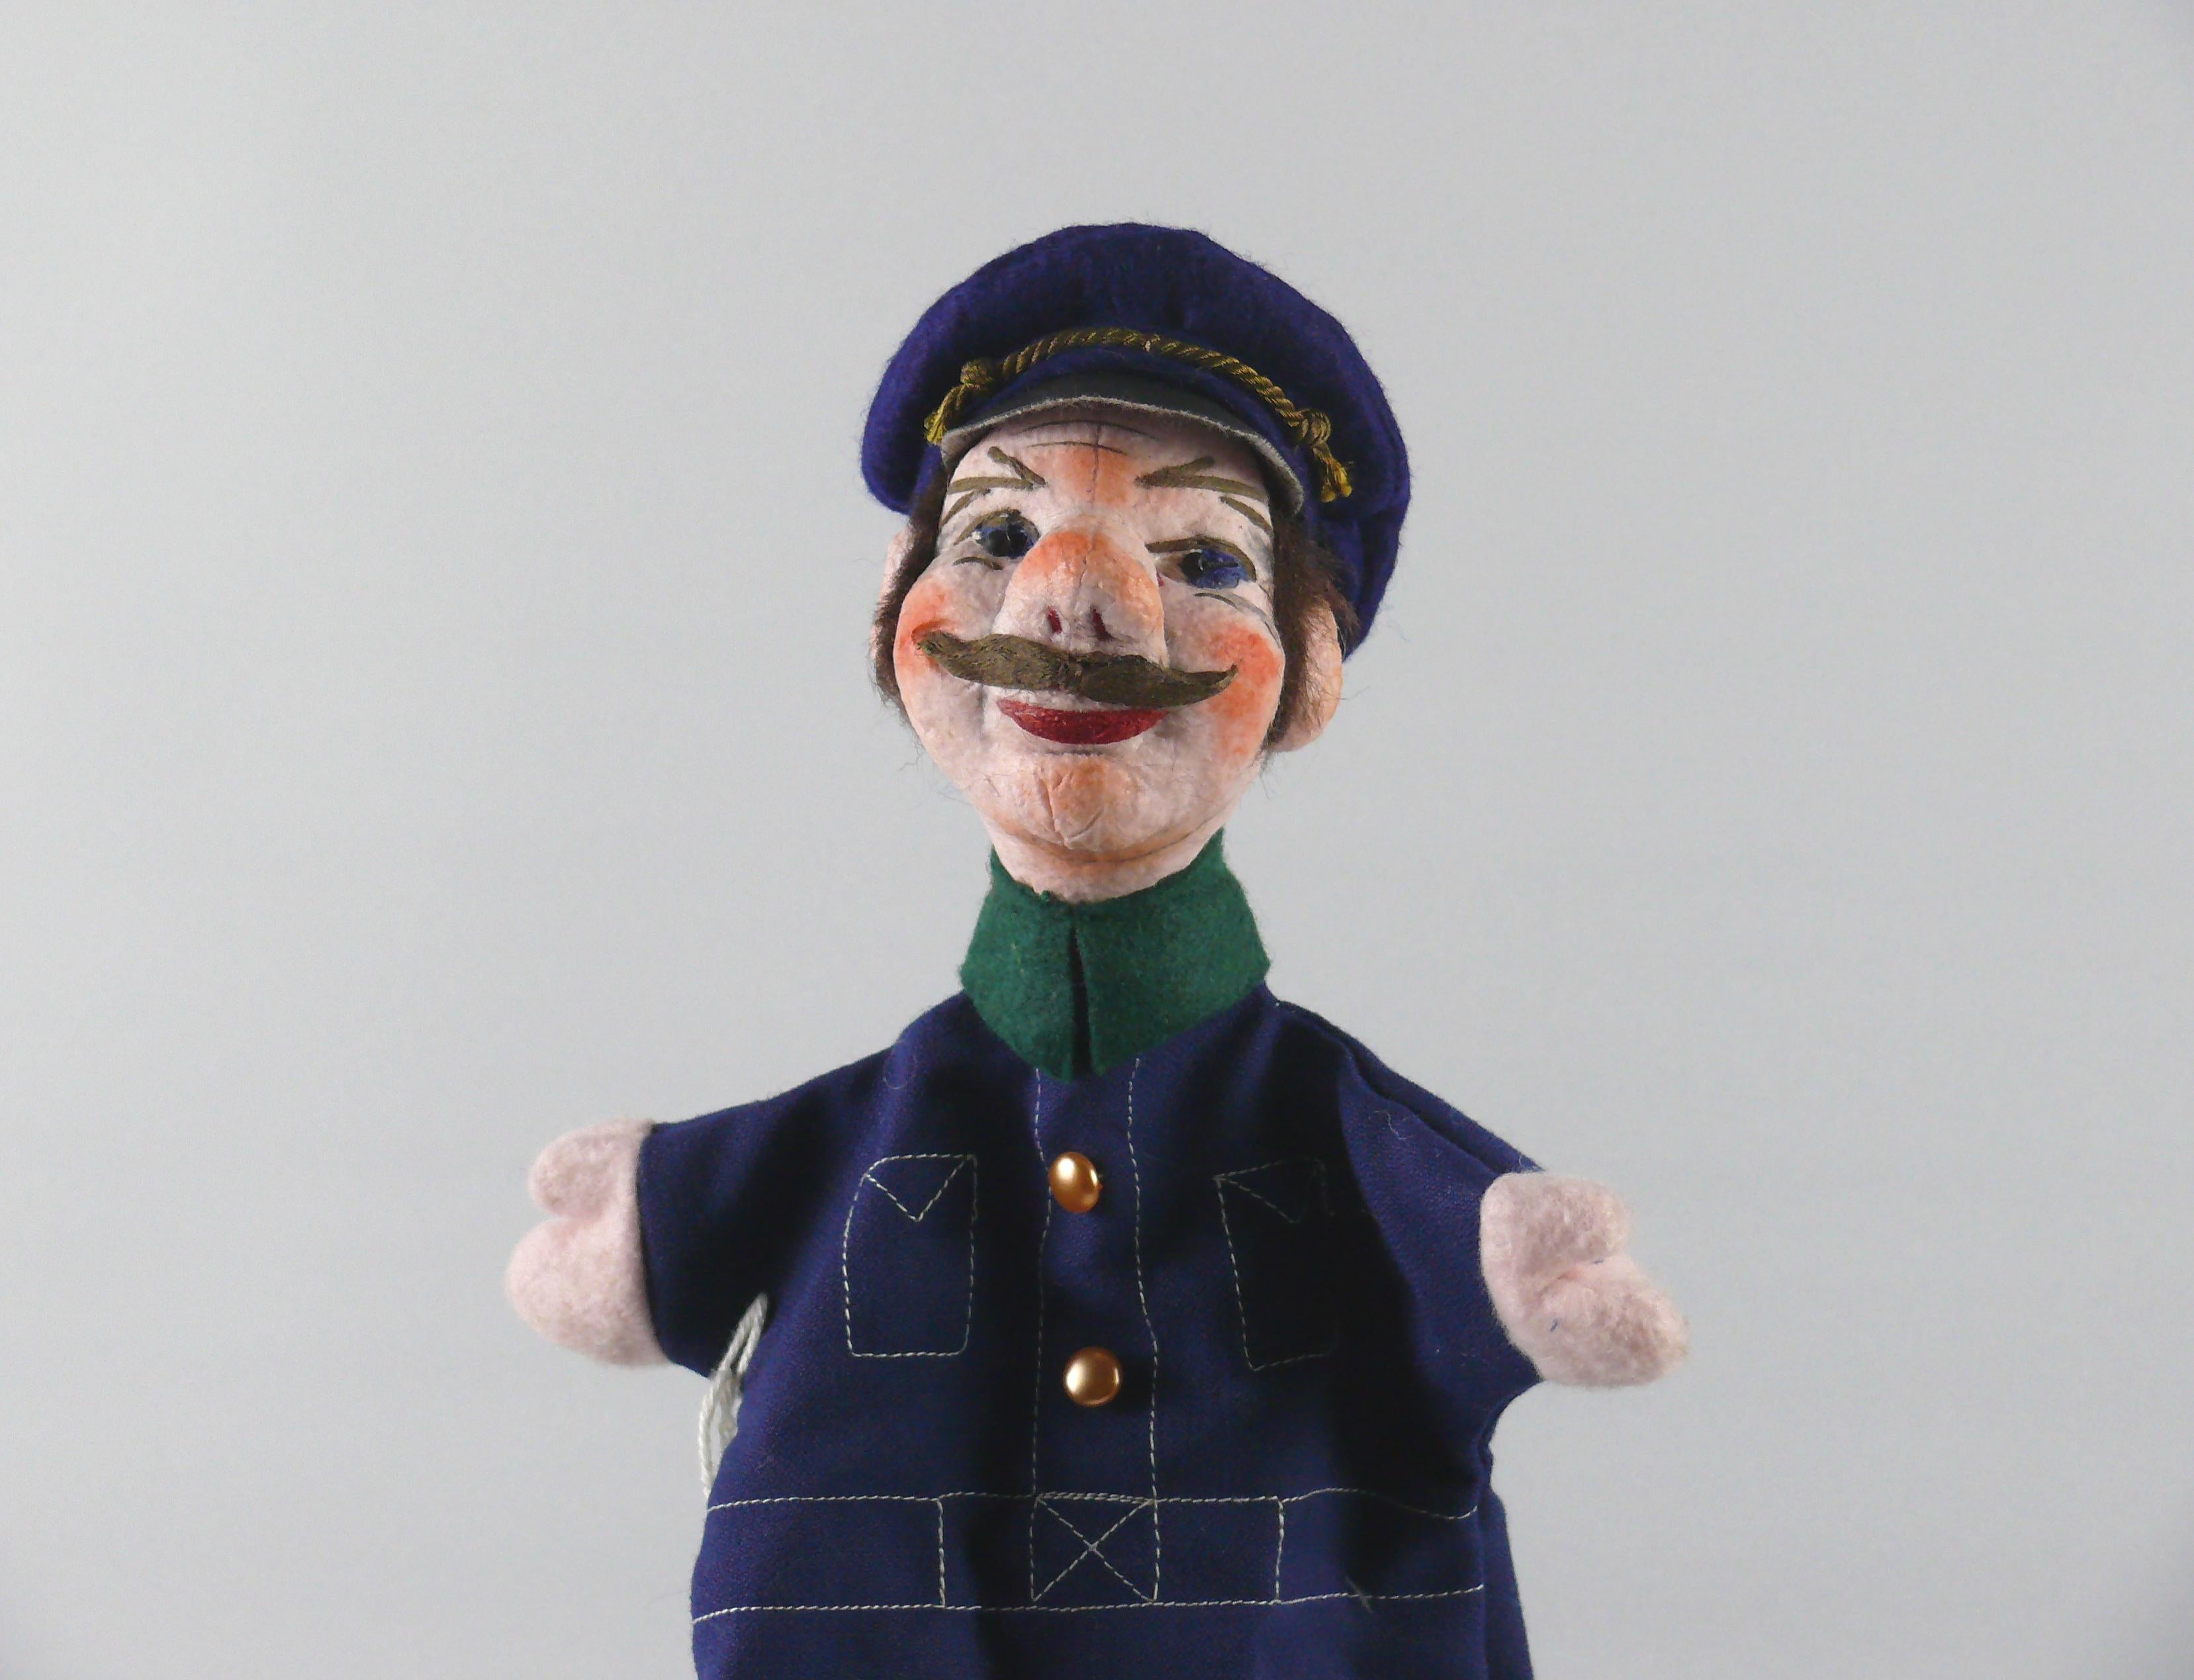 Handmade original Dresden artist puppets / hand puppet - police officer, as good as new. Collector's item from the former GDR.
Special artist doll, high quality and great collector's value.

Height approx. 35 cm - textiles, cardboard, cotton wool,